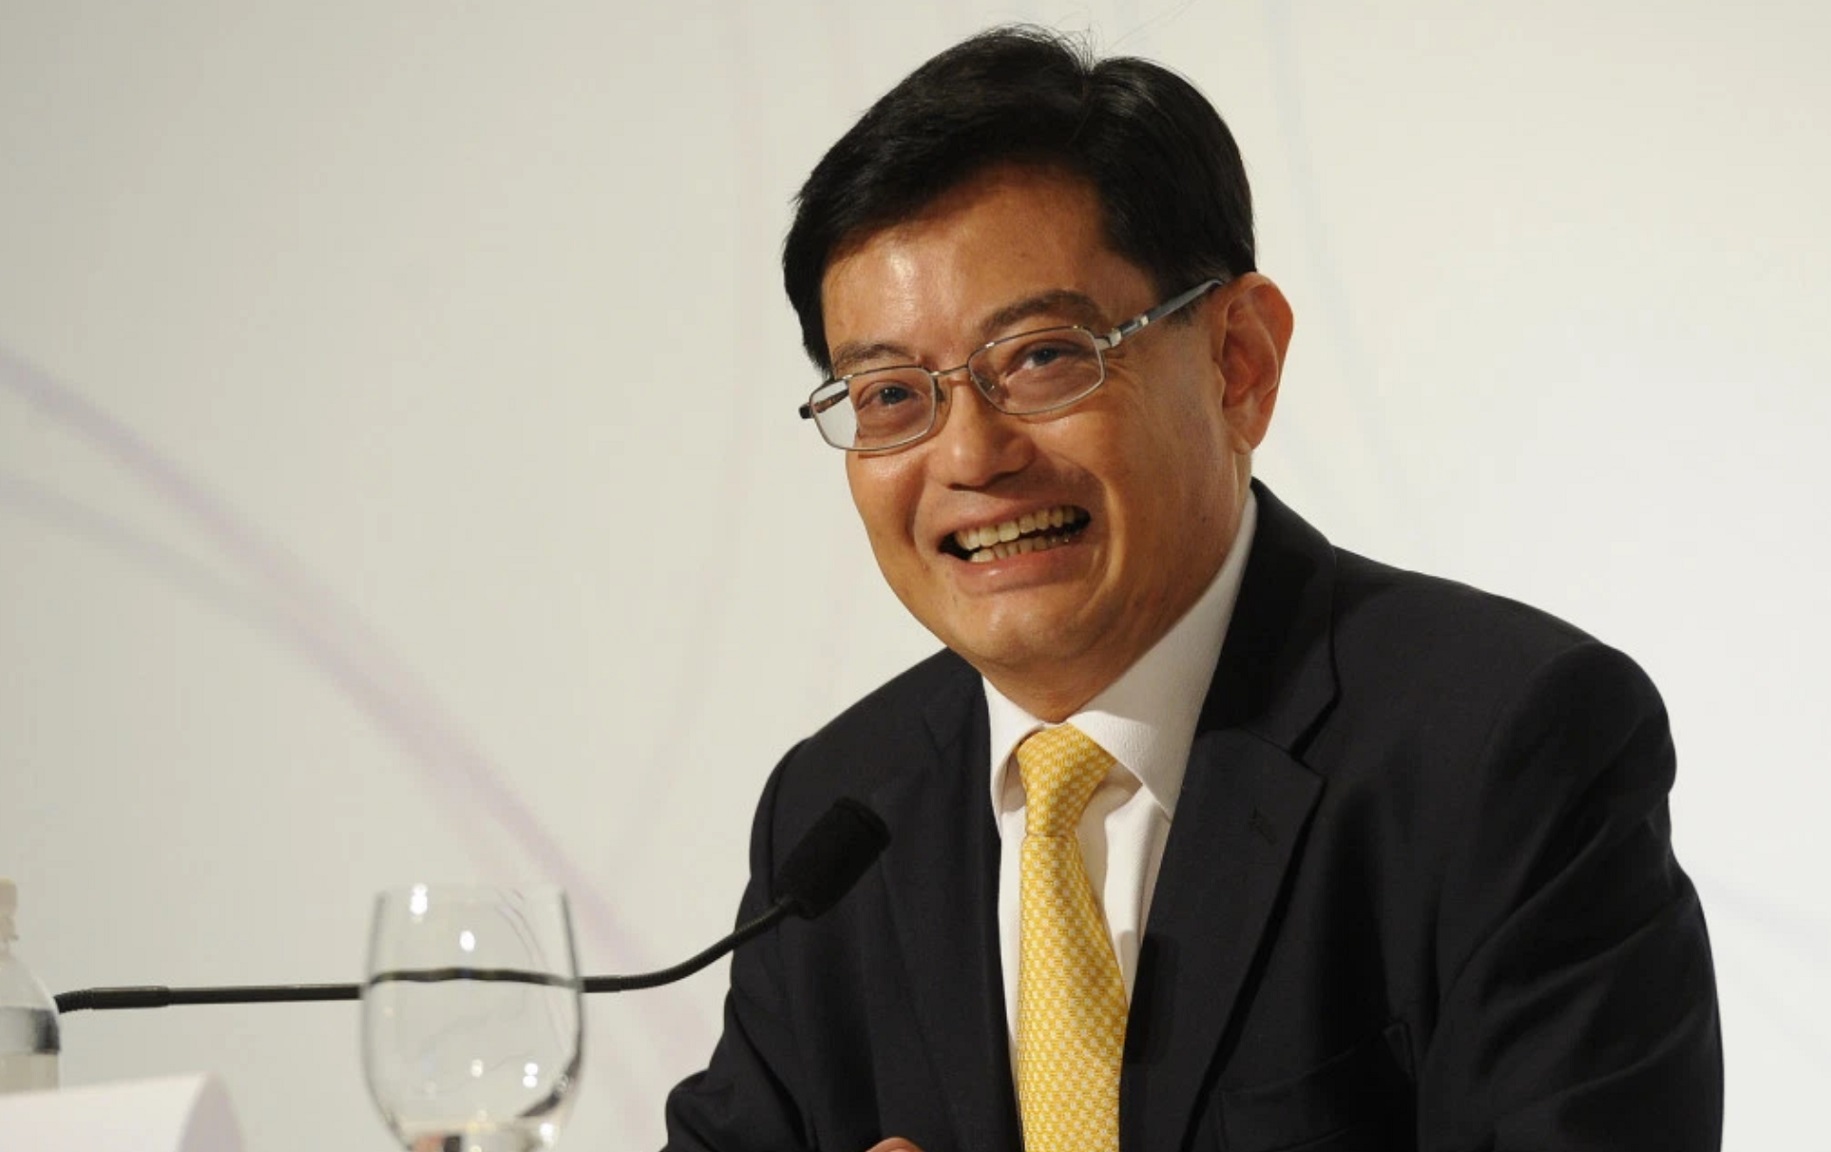 Heng Swee Keat, PM, Prime Minister, PAP. GST, MOF